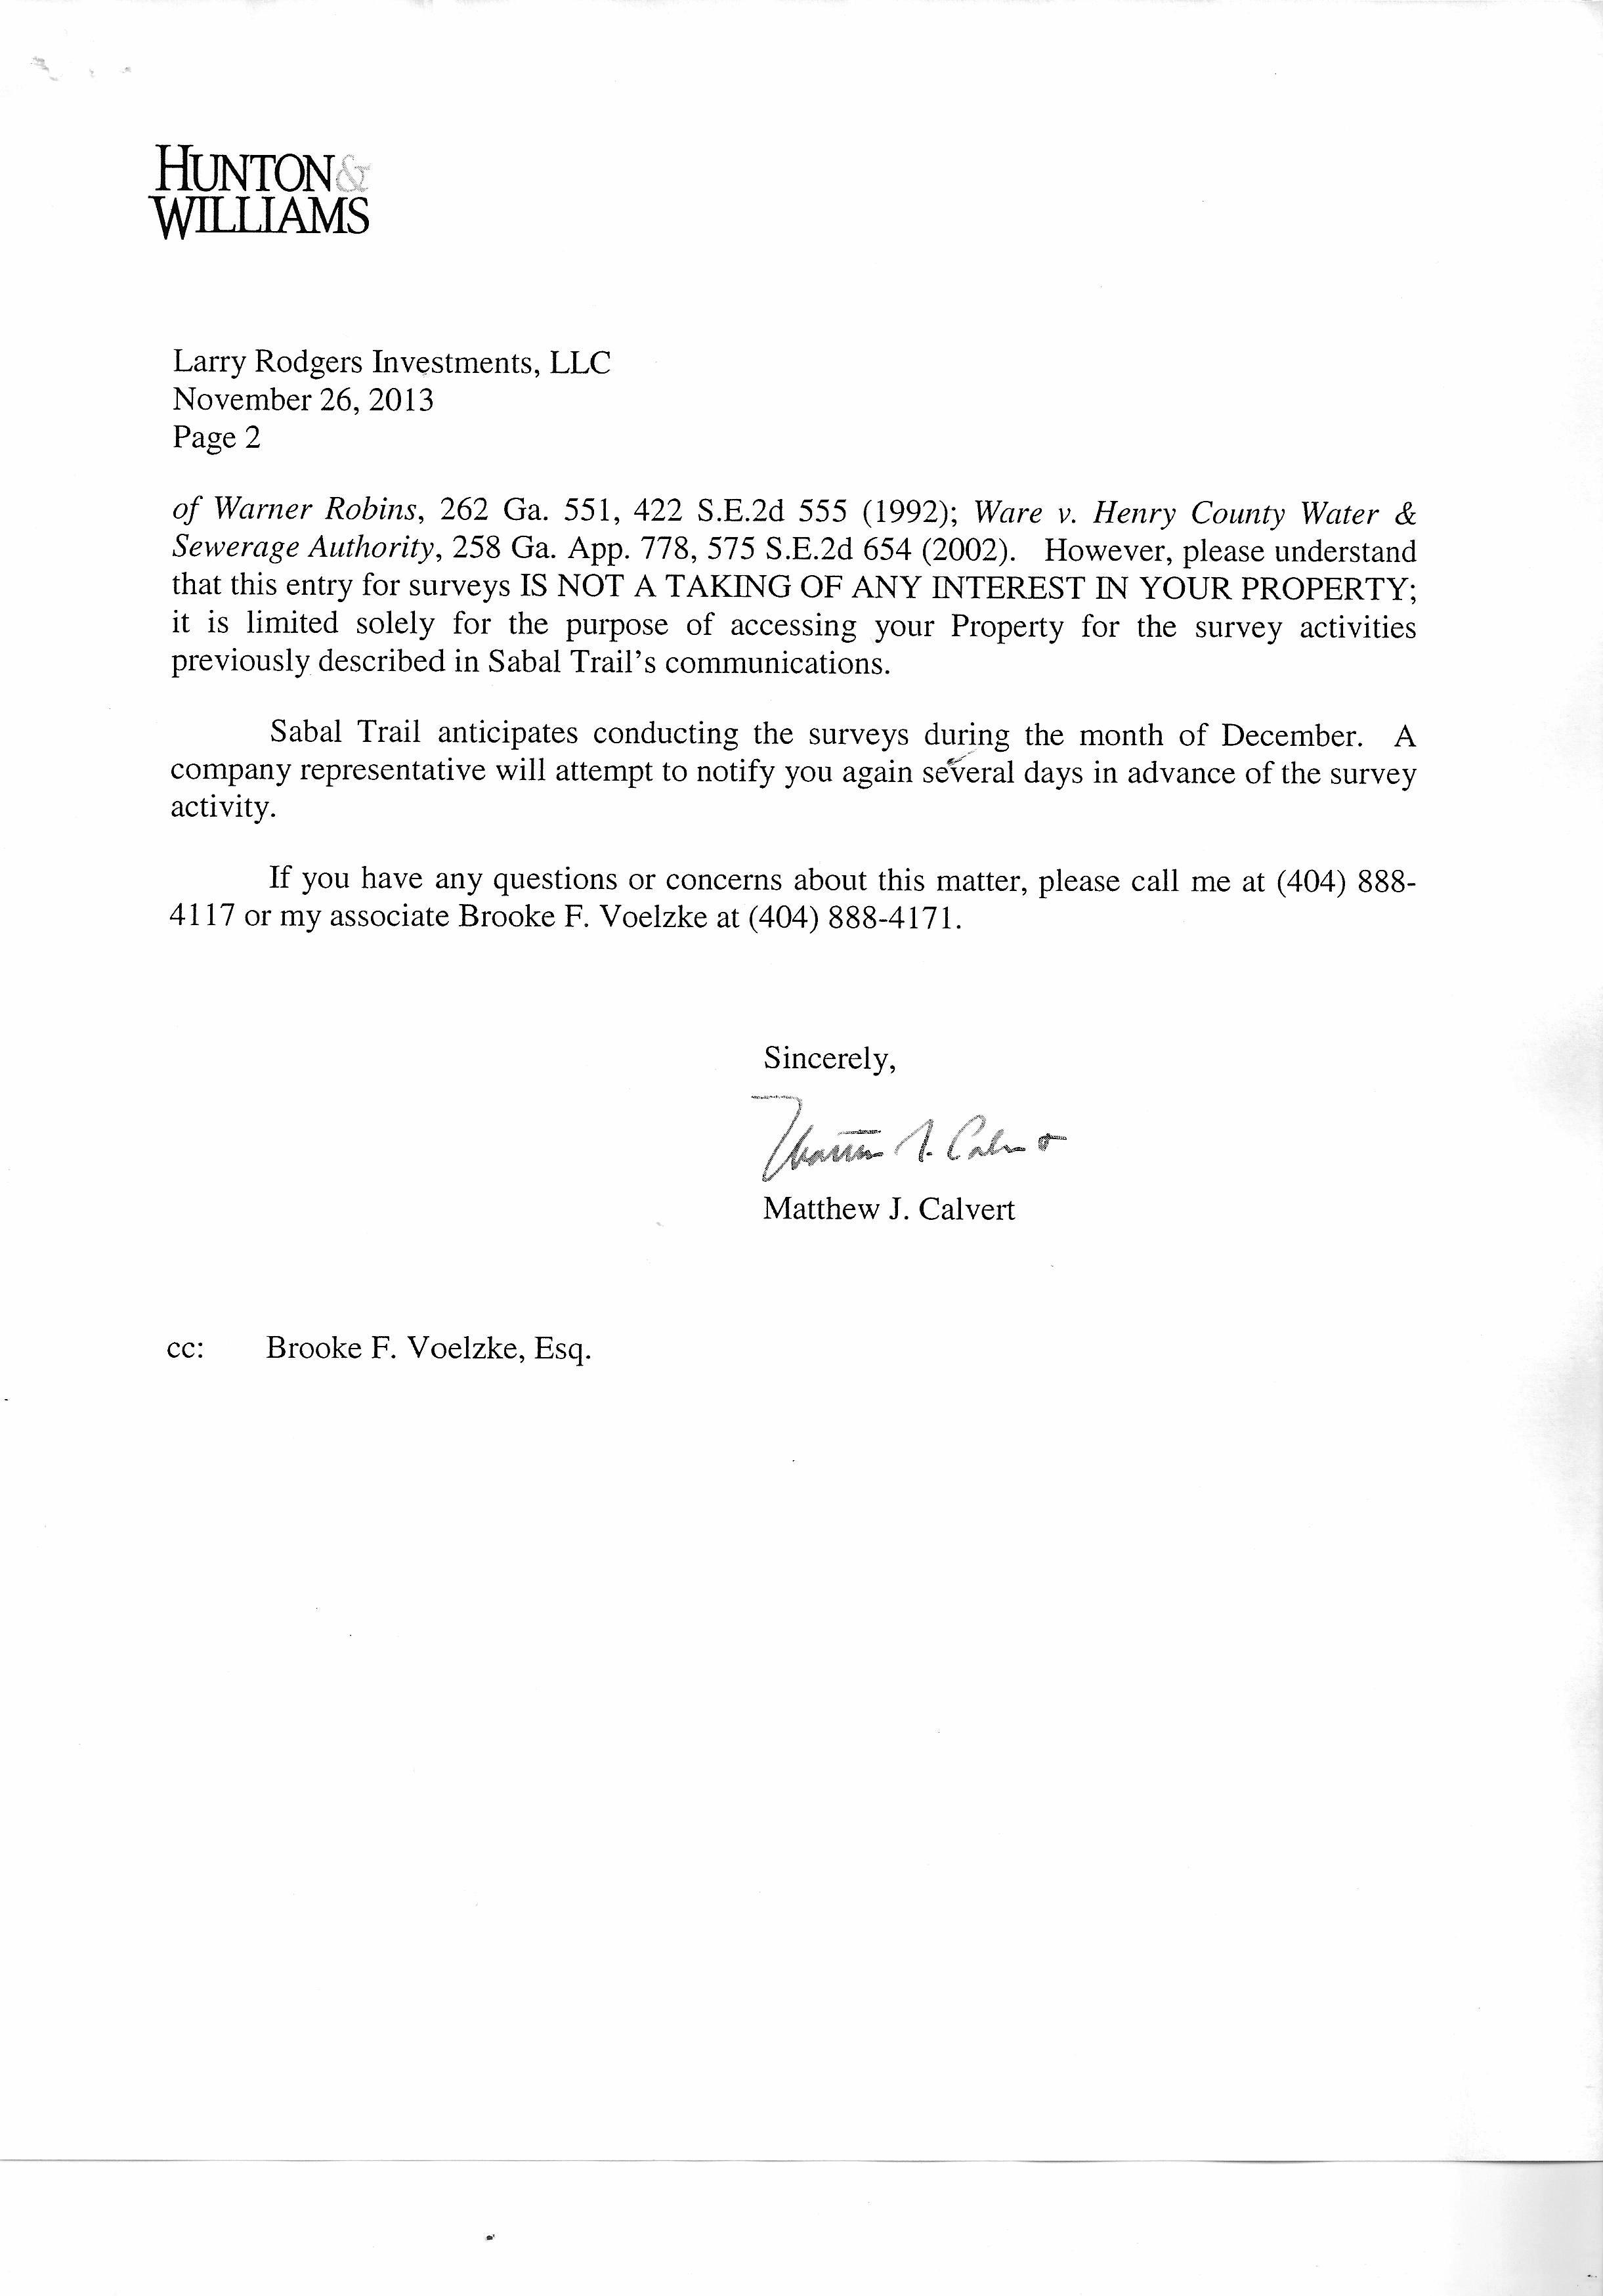 Page 2: Sabal Trail anticipates conducting the surveys during the month of December, in Eminent domain letter from Sabal Trail attorney, by Larry Rodgers Investments, for Spectrabusters.org, 26 November 2013